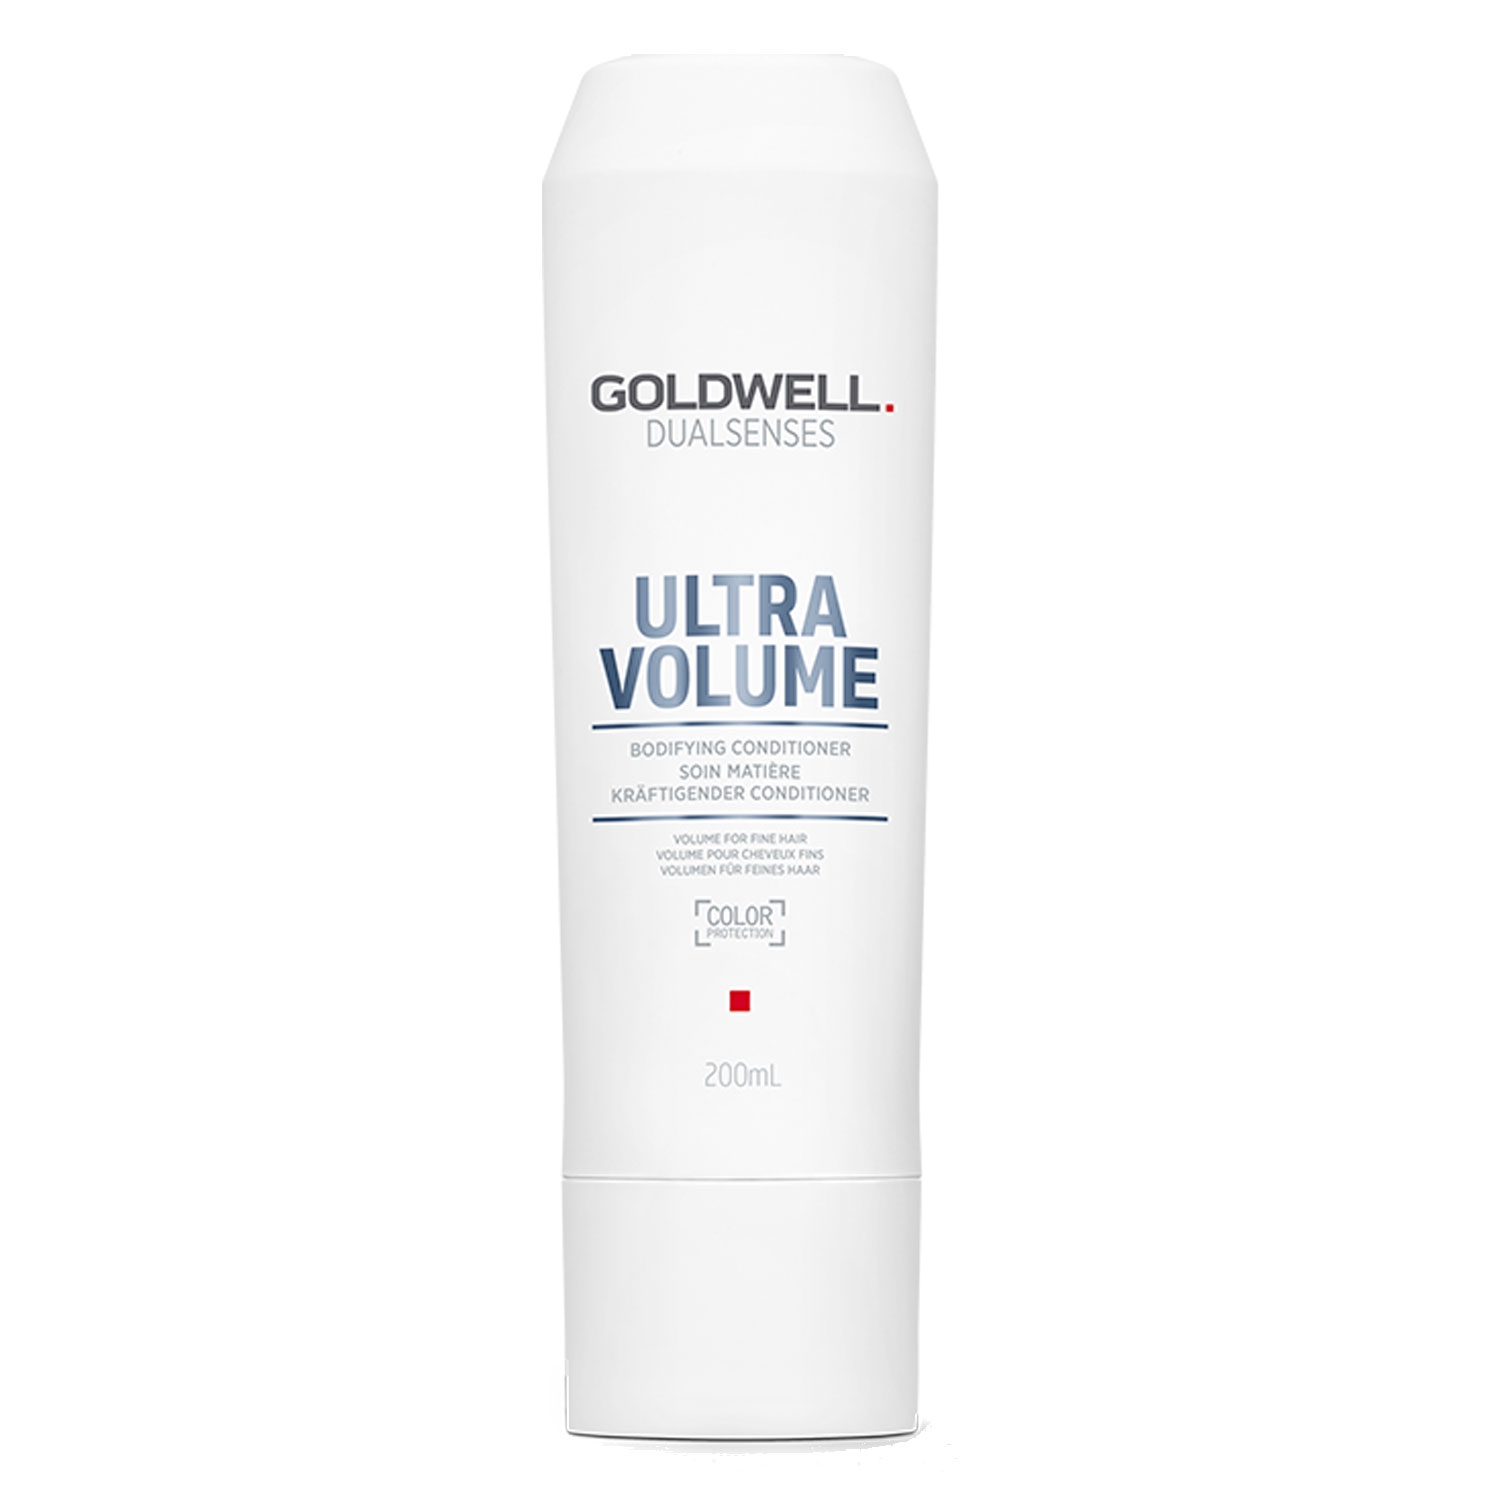 Product image from Dualsenses Ultra Volume - Bodifying Conditioner